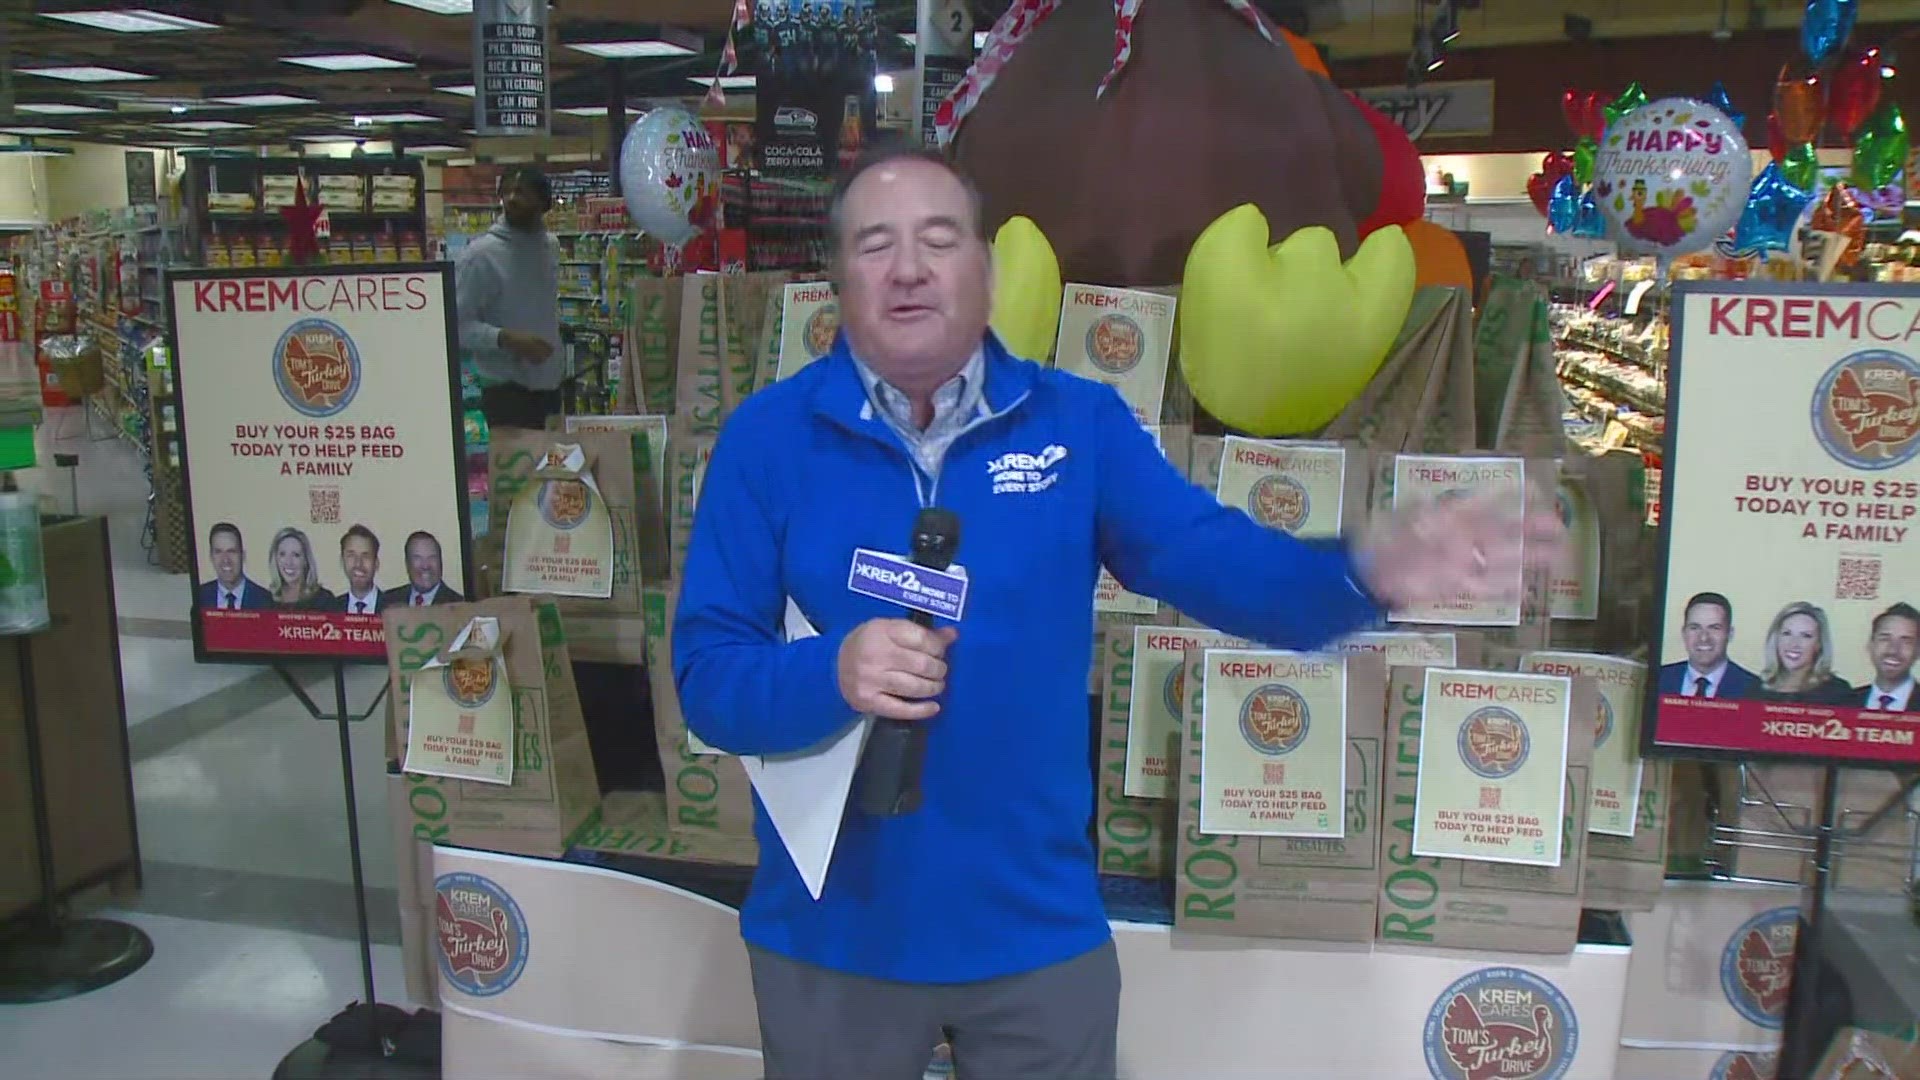 KREM Cares Tom's Turkey Drive continues in area Rosauers. Your donation helps feed a local family on Thanksgiving.